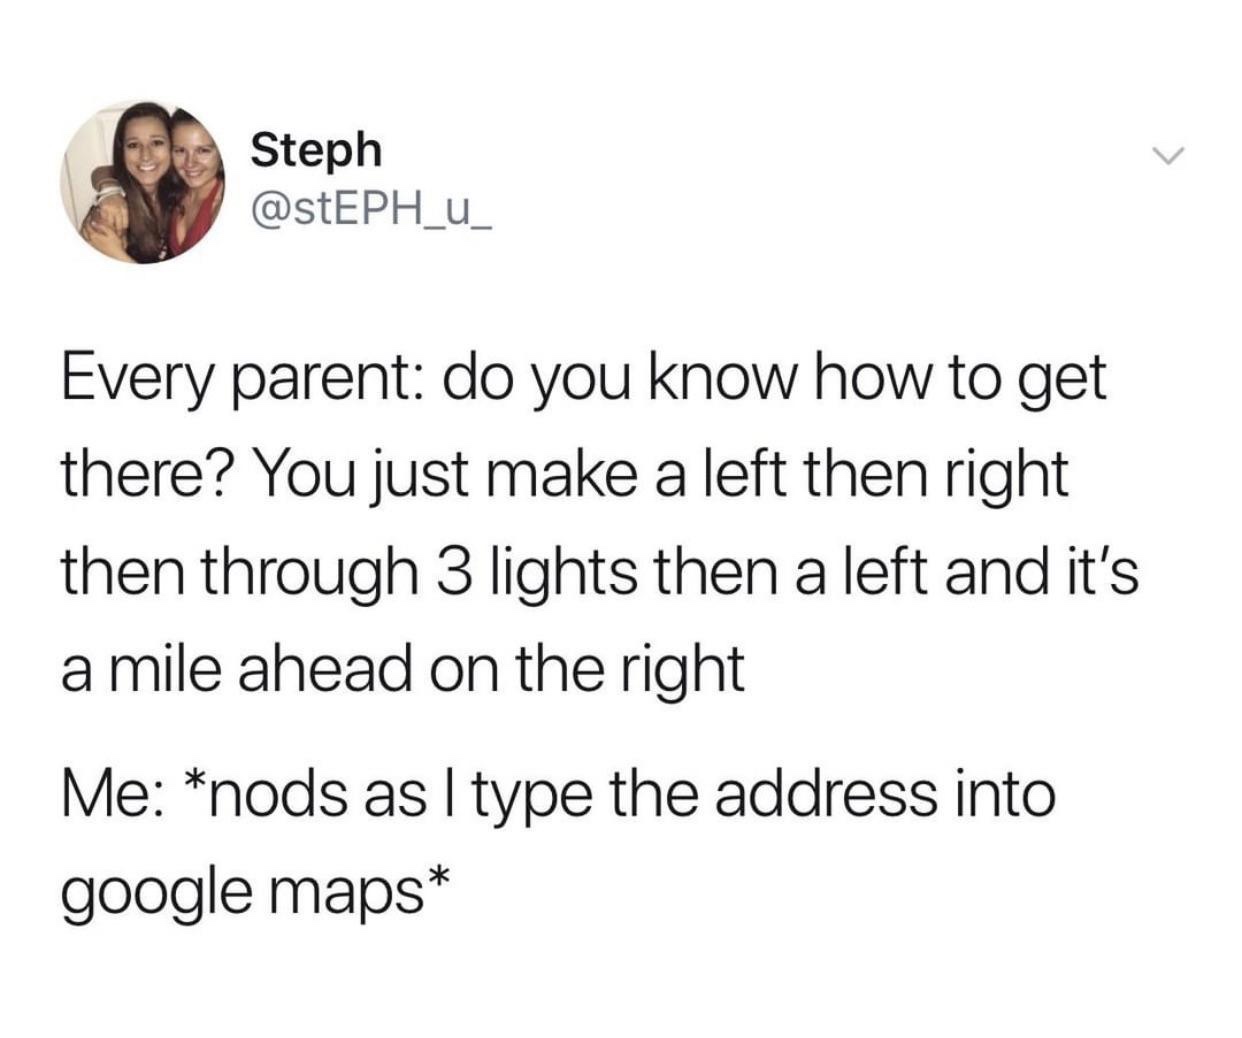 nit knowing enough to have an opinion meme - Steph Every parent do you know how to get there? You just make a left then right then through 3 lights then a left and it's a mile ahead on the right Me nods as I type the address into google maps